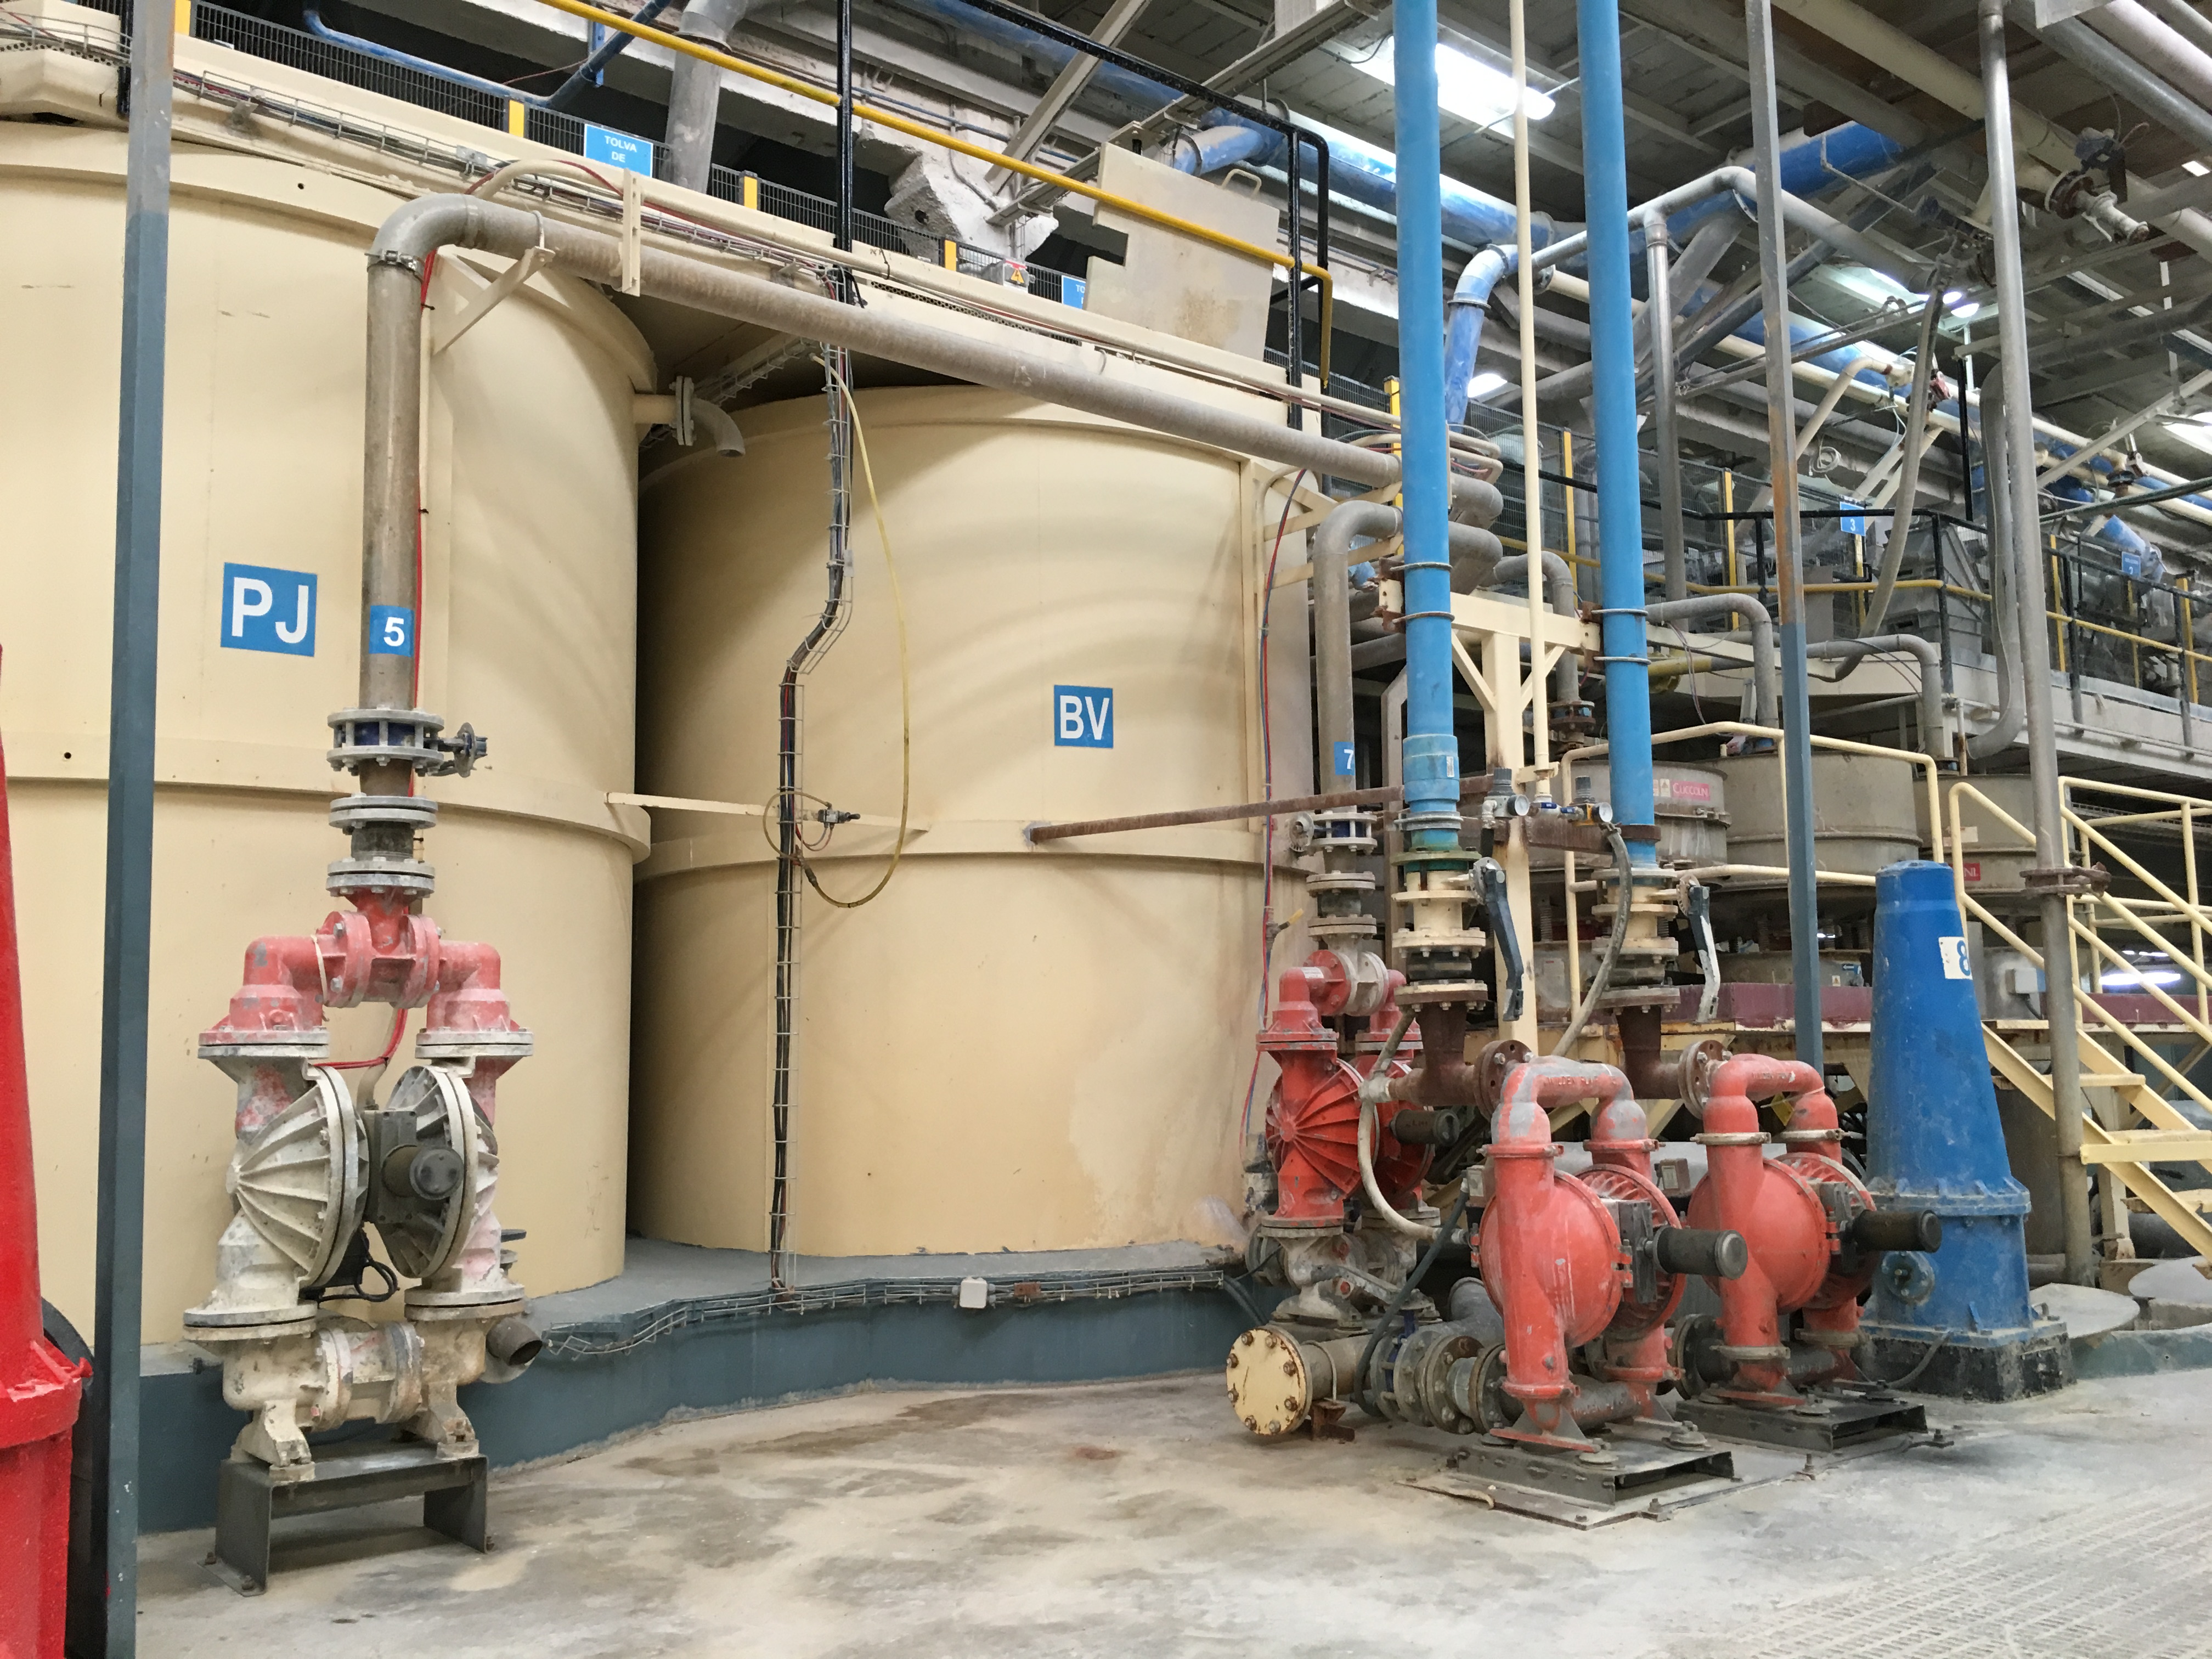 Wilden Original Series Air-Operated Double-Diaphragm (AODD) Pumps in operation at a ceramic plant in Spain.